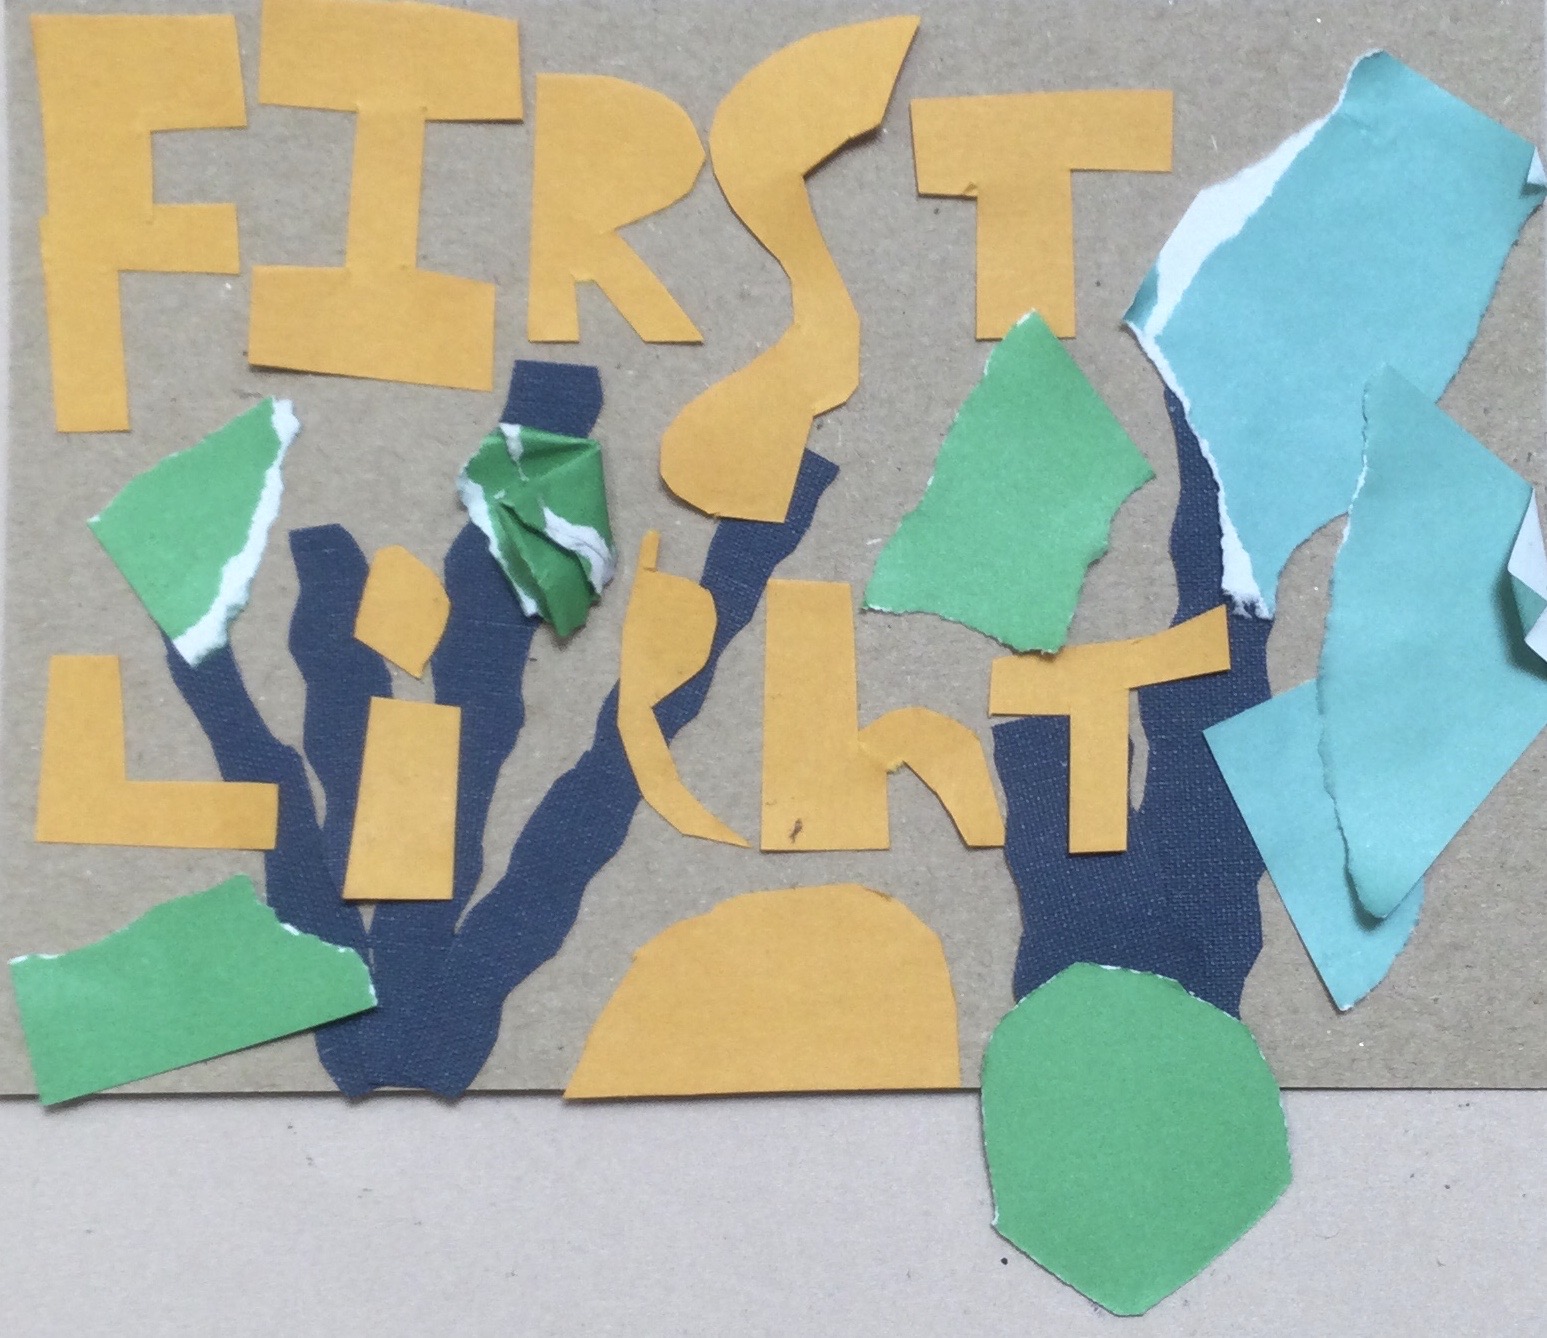 A plain brown postcard with cut out letters in sand-coloured paper spelling the words FIRST LIGHT over blue and green paper shapes